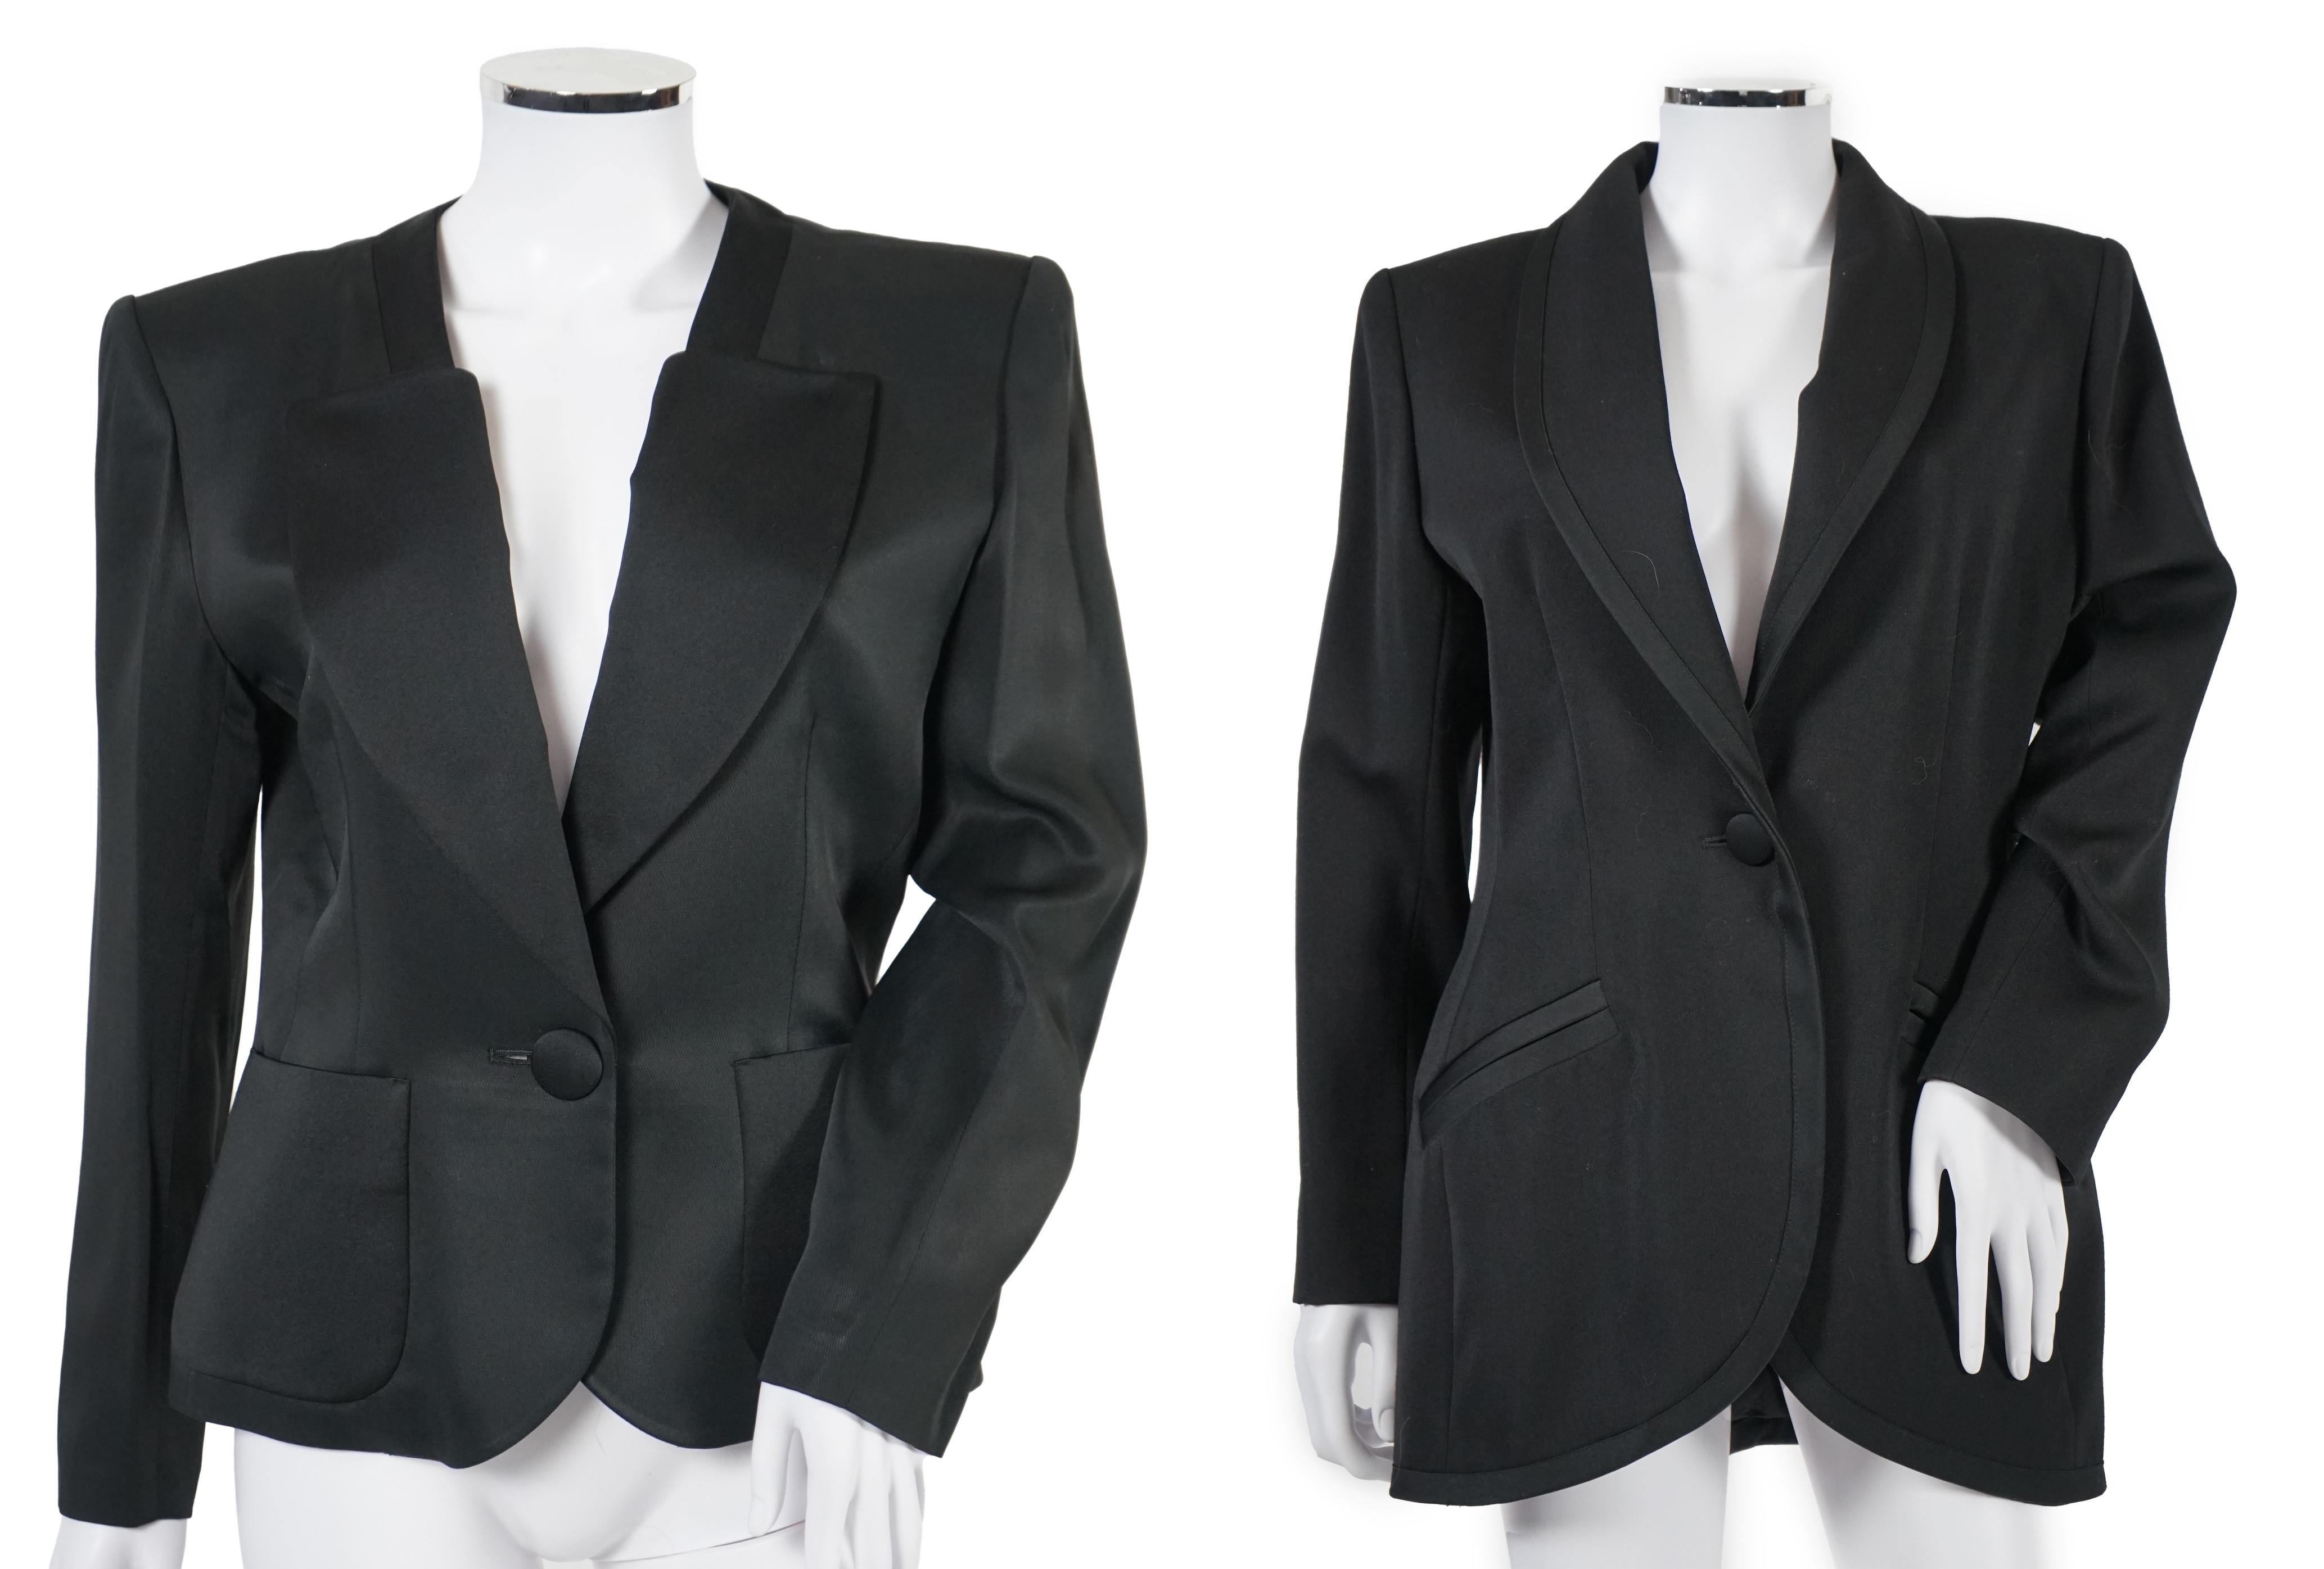 Two vintage Yves Saint Laurent lady's variation black trouser suits, F 42 (UK 14). Please note alterations to make the waist smaller may have been carried out on some of the skirts. Proceeds to Happy Paws Puppy Rescue.